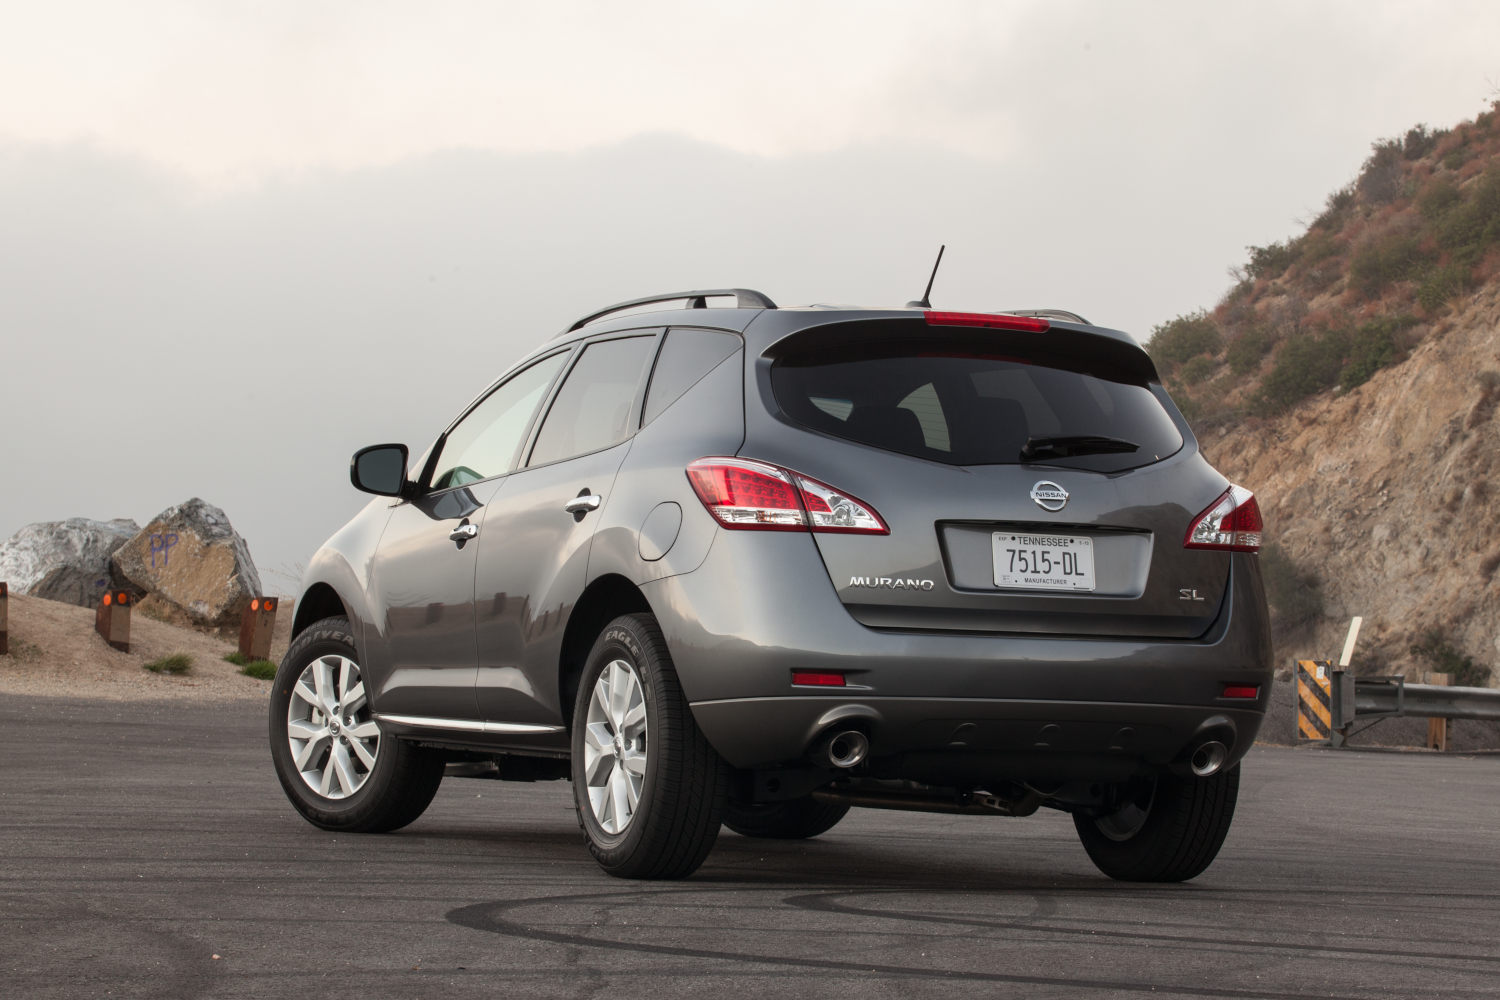 The best small SUVs include this 2014 Nissan Murano